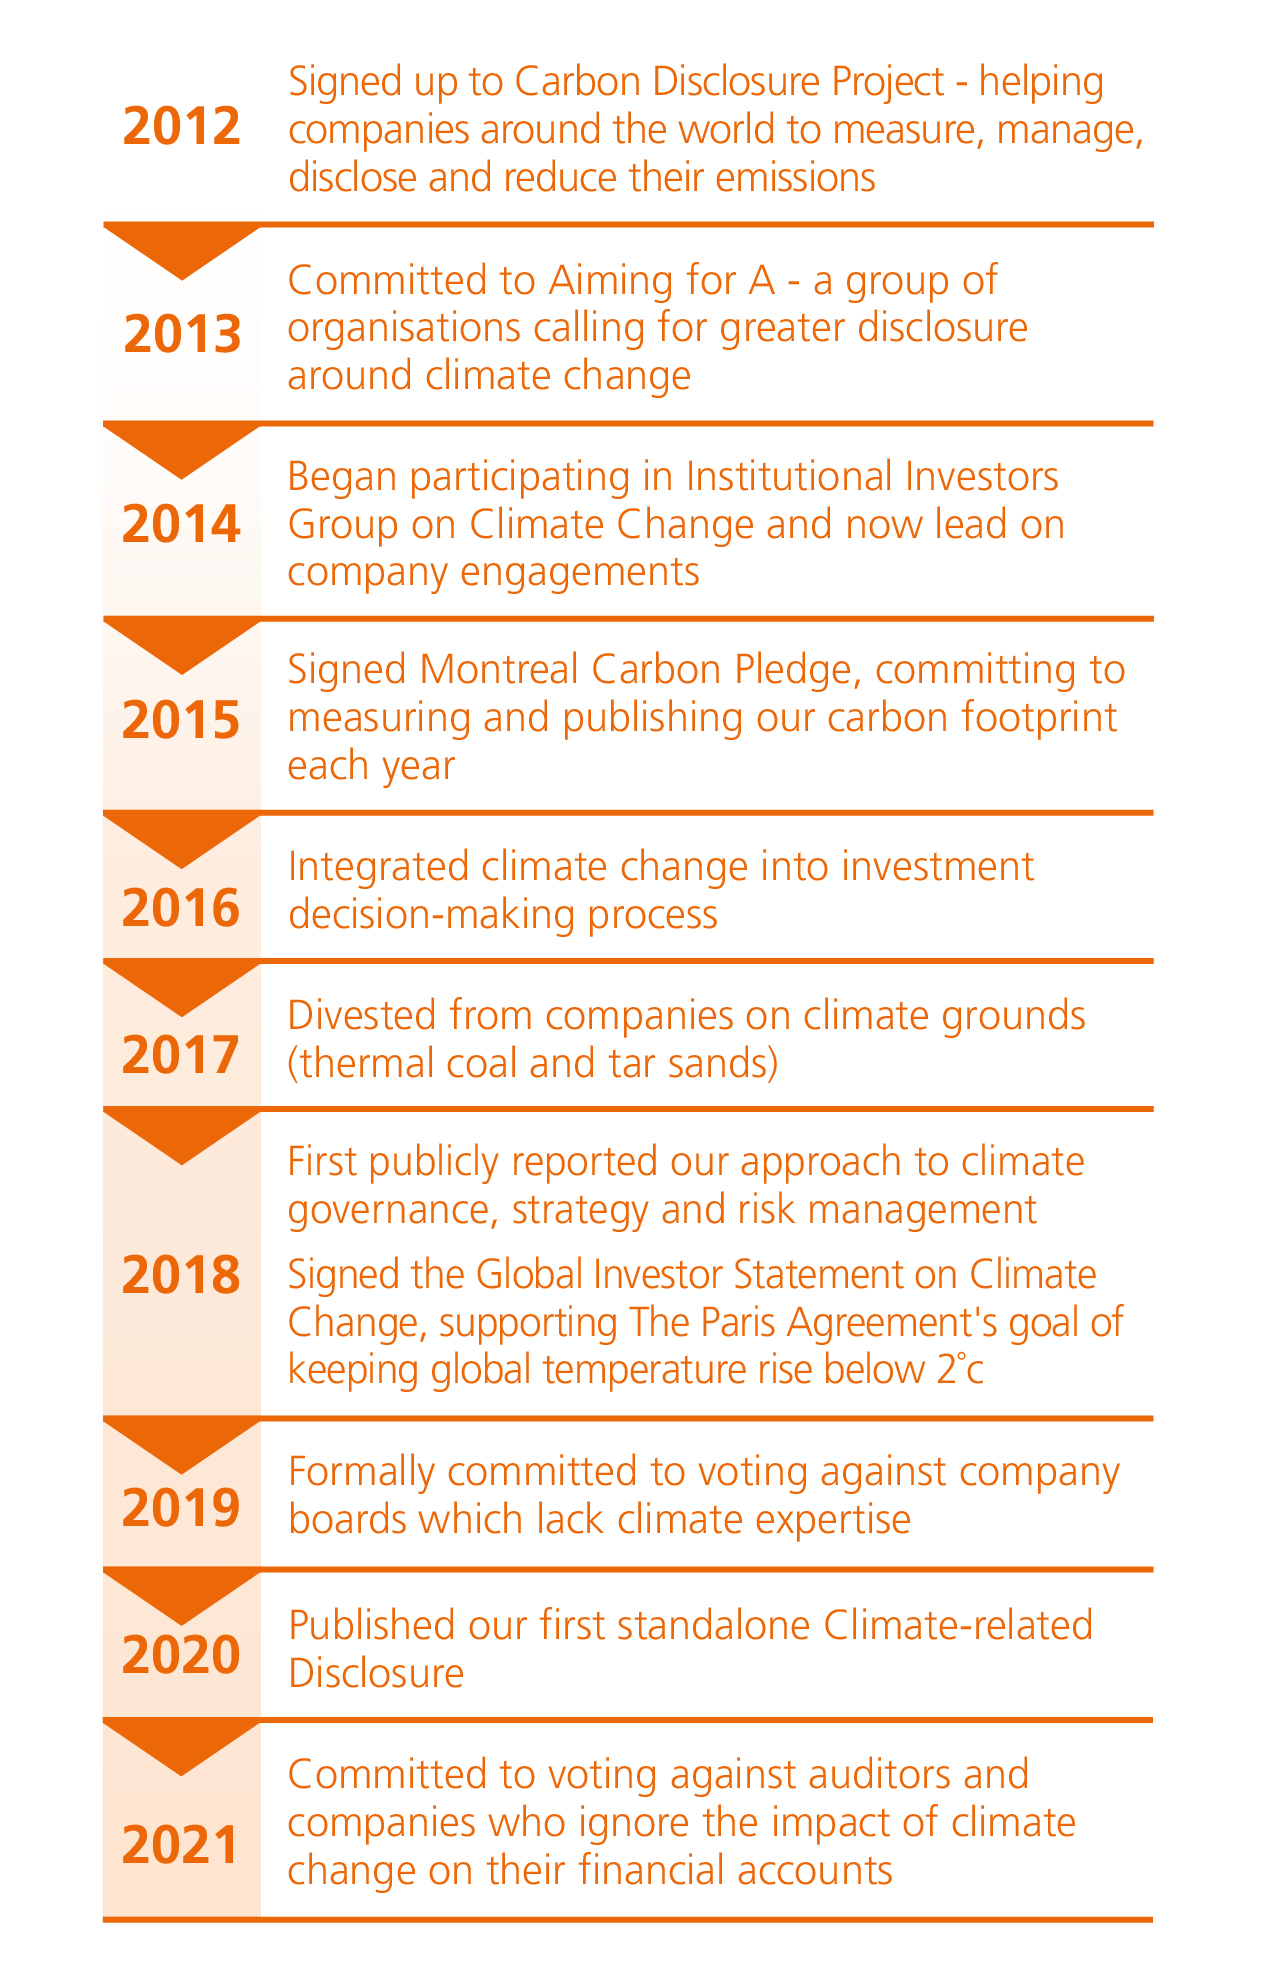 A list of our climate change actions by year 